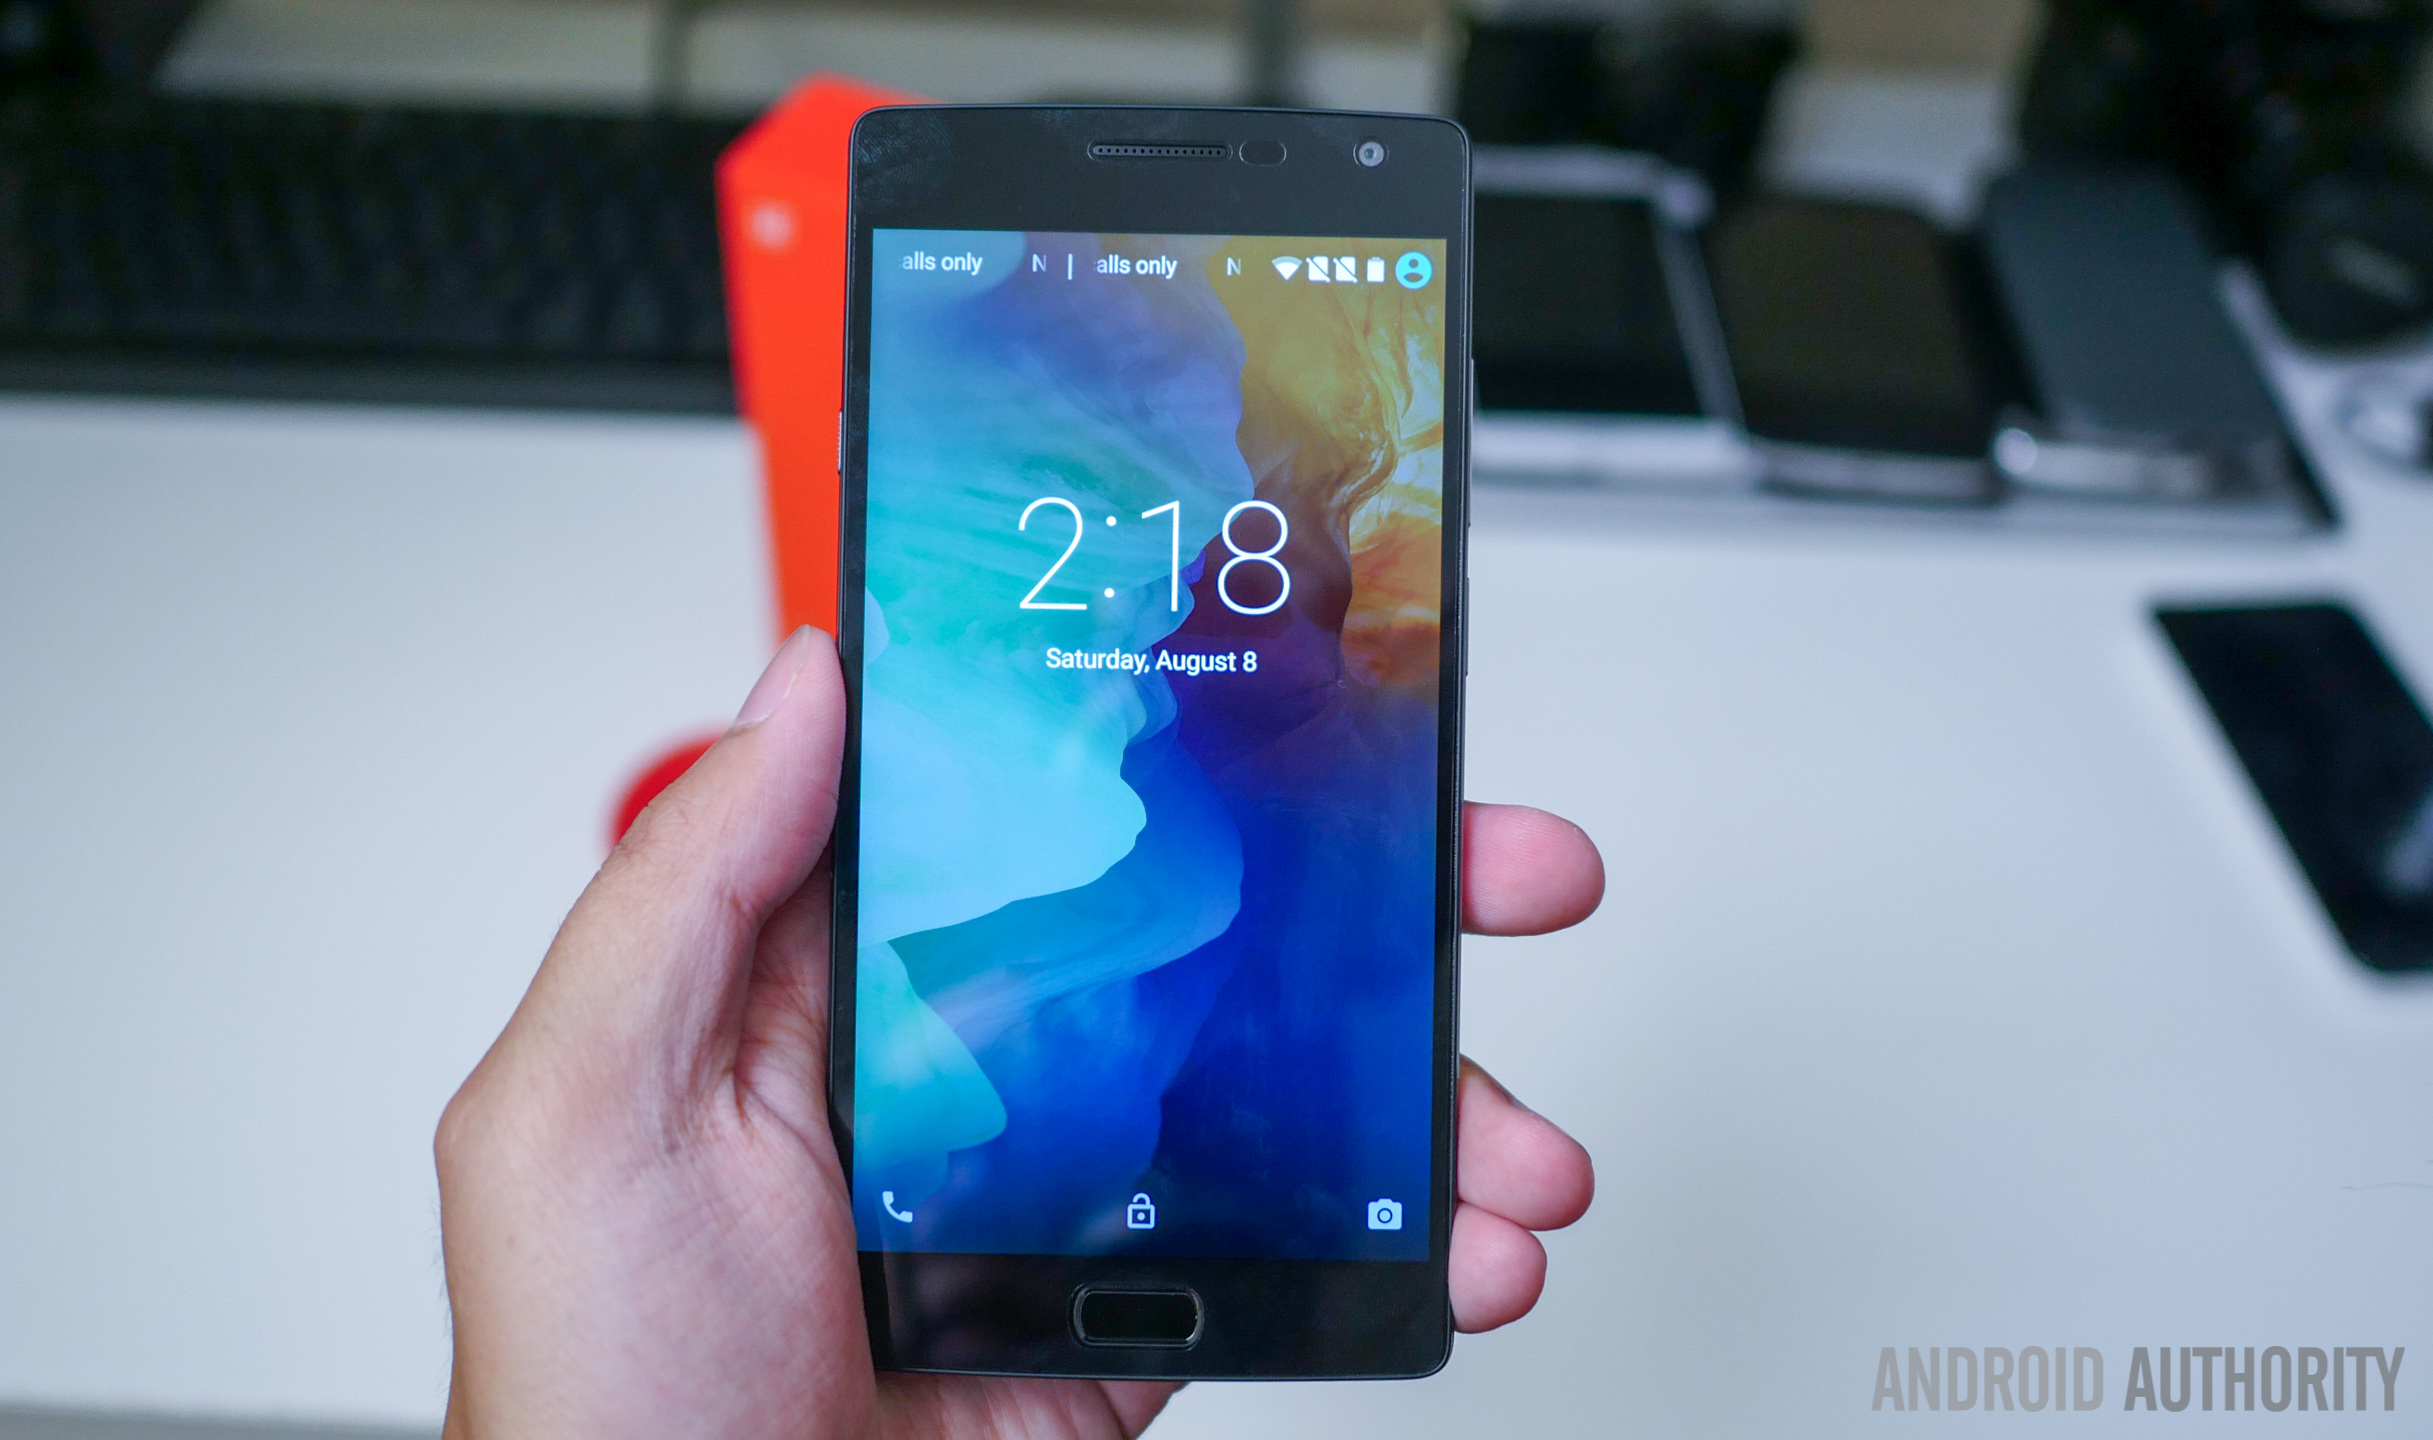 oneplus 2 unboxing initial setup aa (28 of 32)